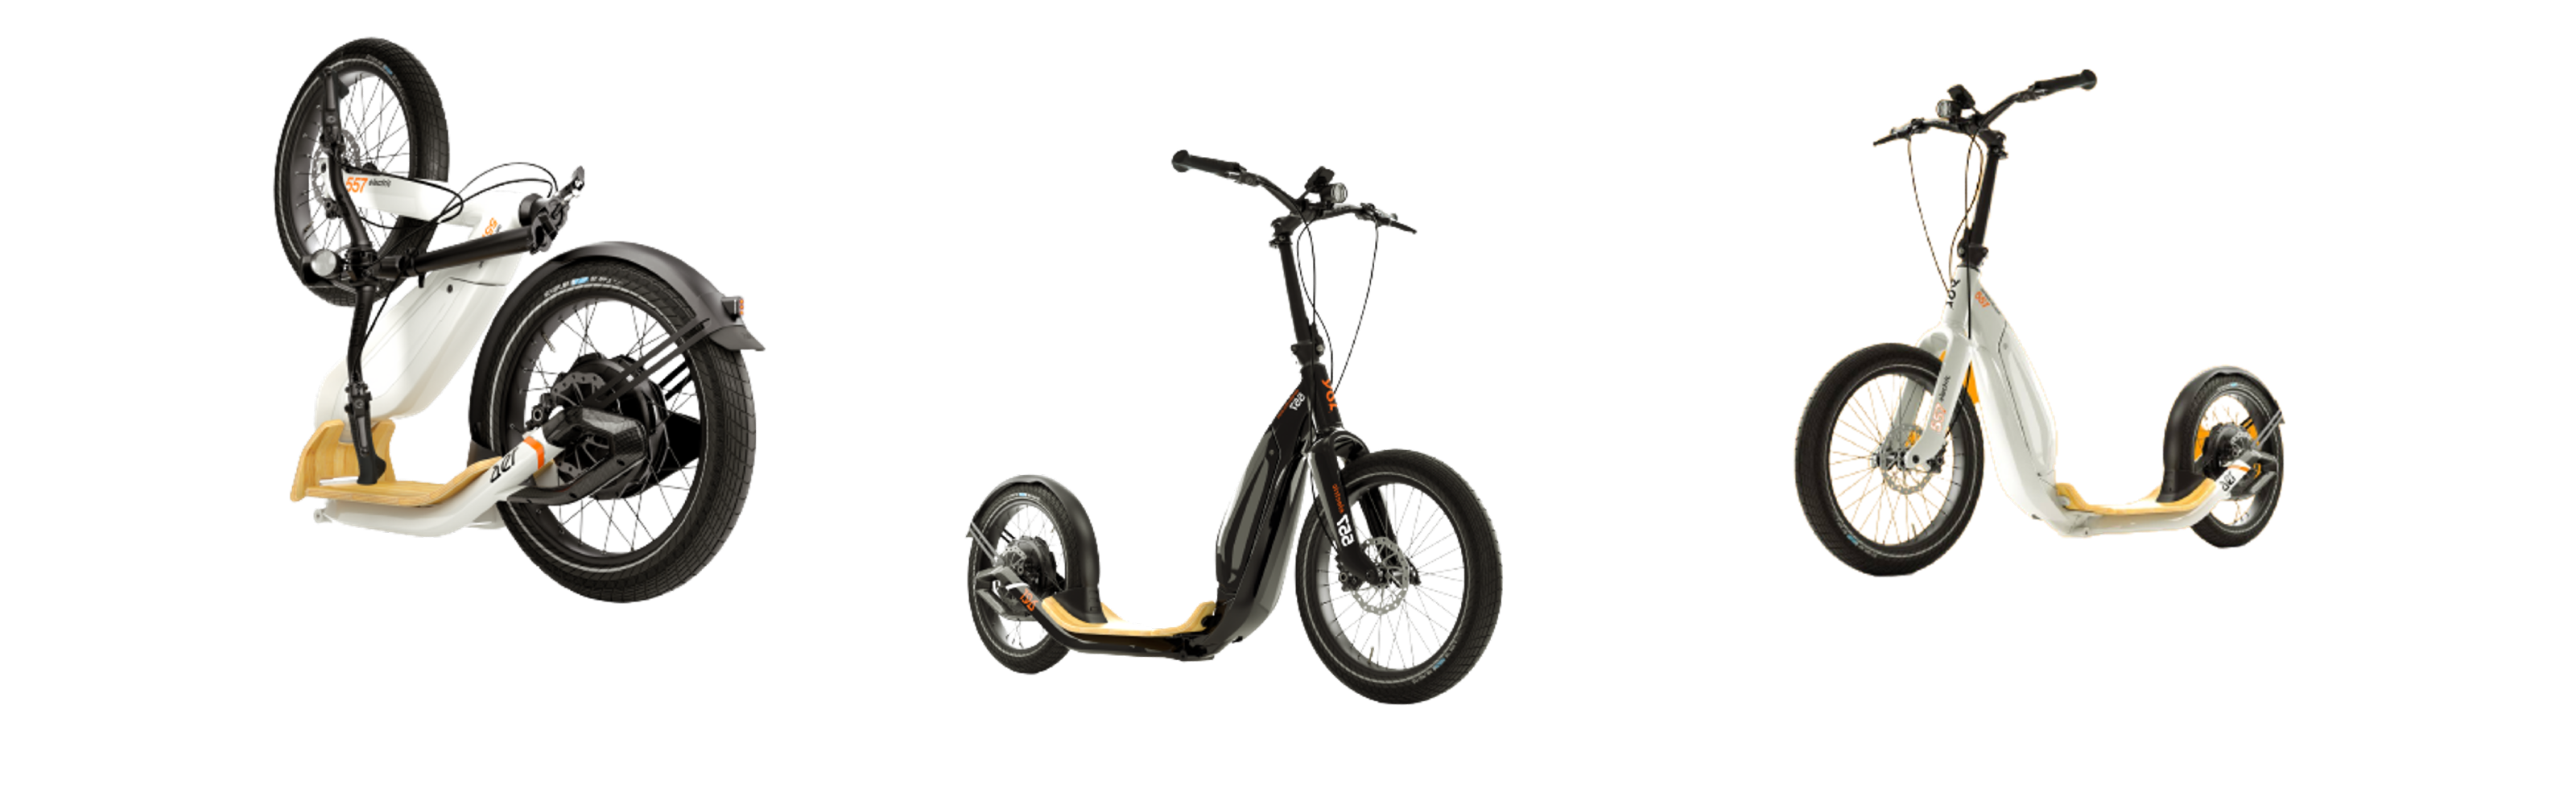 AER Electric Scooter Footer Image | Ride and Glide